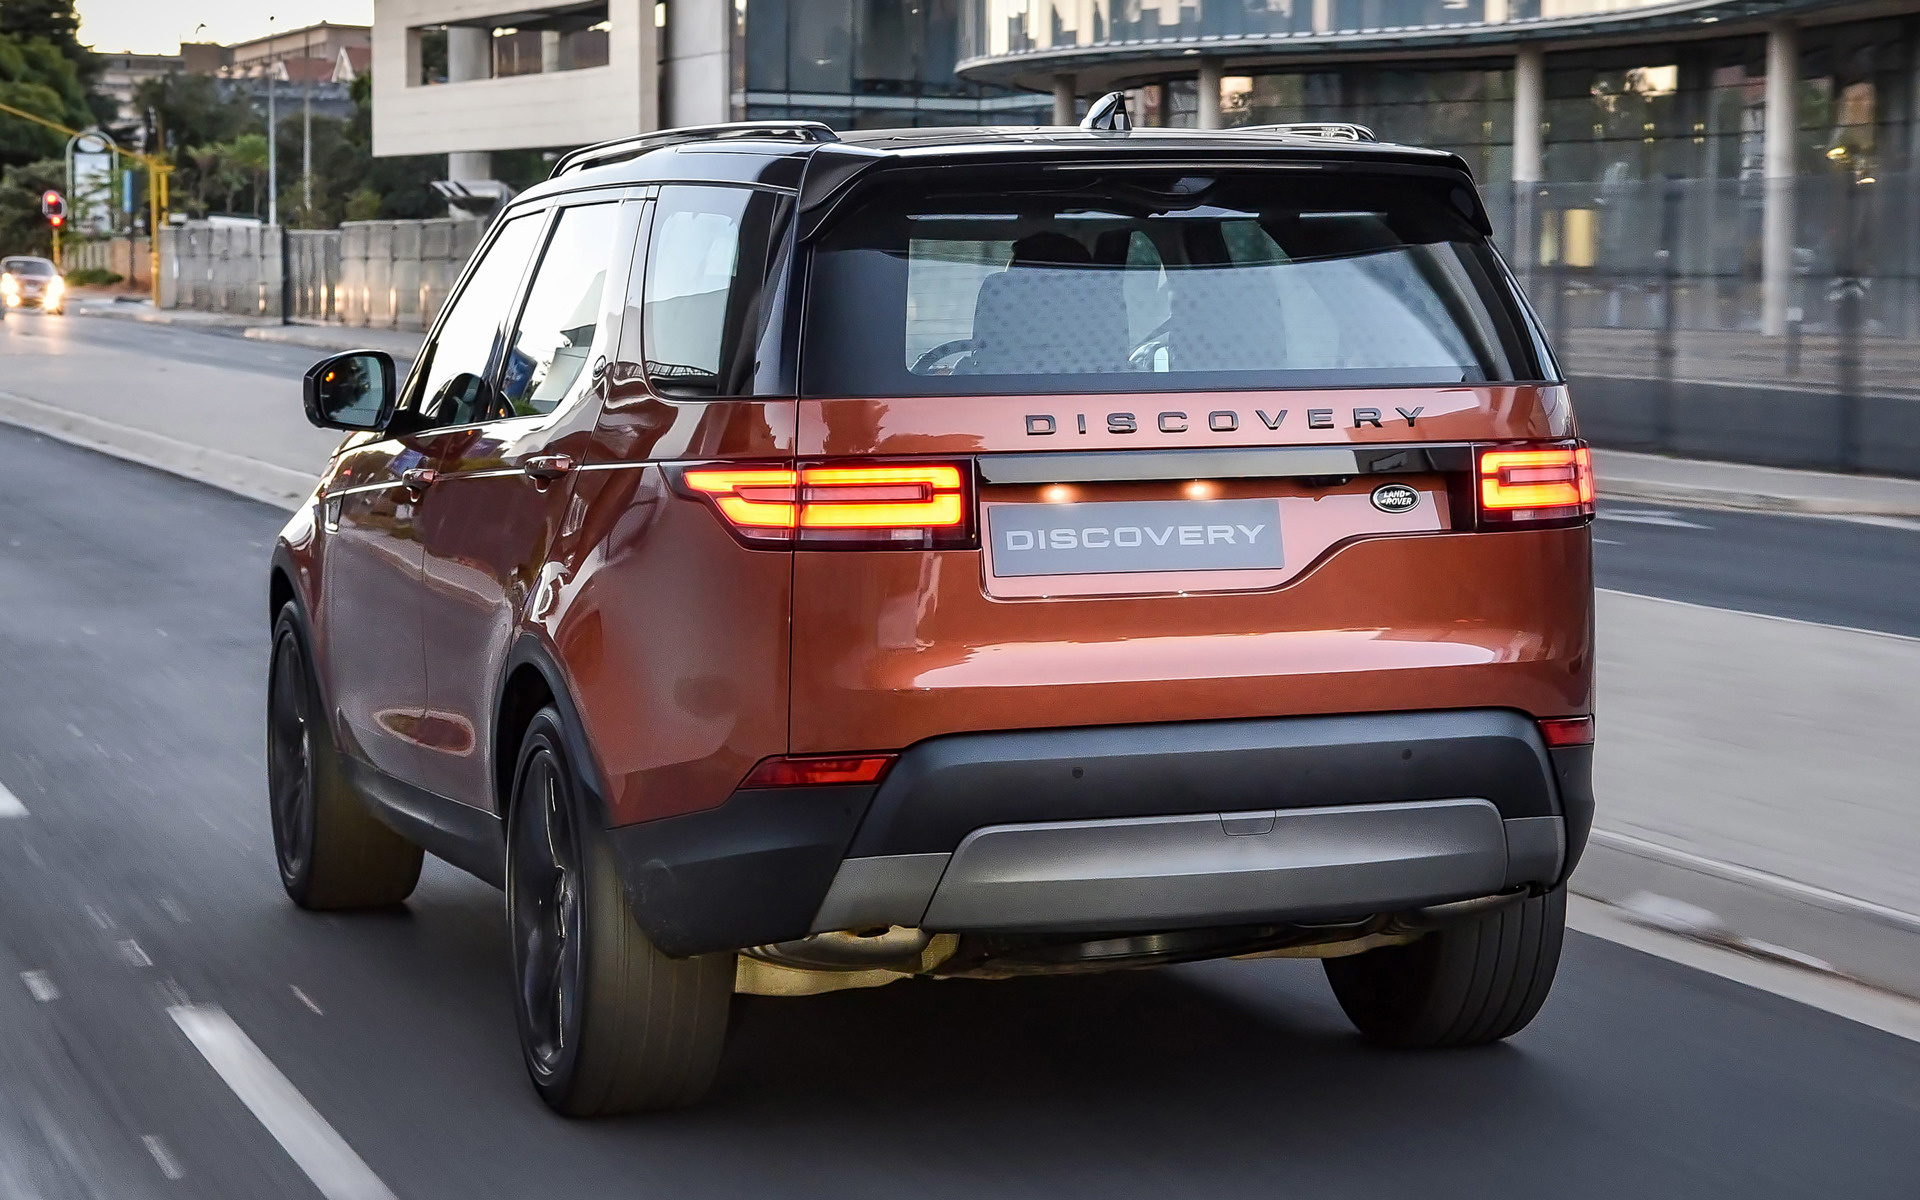 First discovery. Land Rover Discovery 5 first Edition. Land Rover Discovery 5 Black Edition. Land Rover Discovery first Edition. Discovery 4 2016.